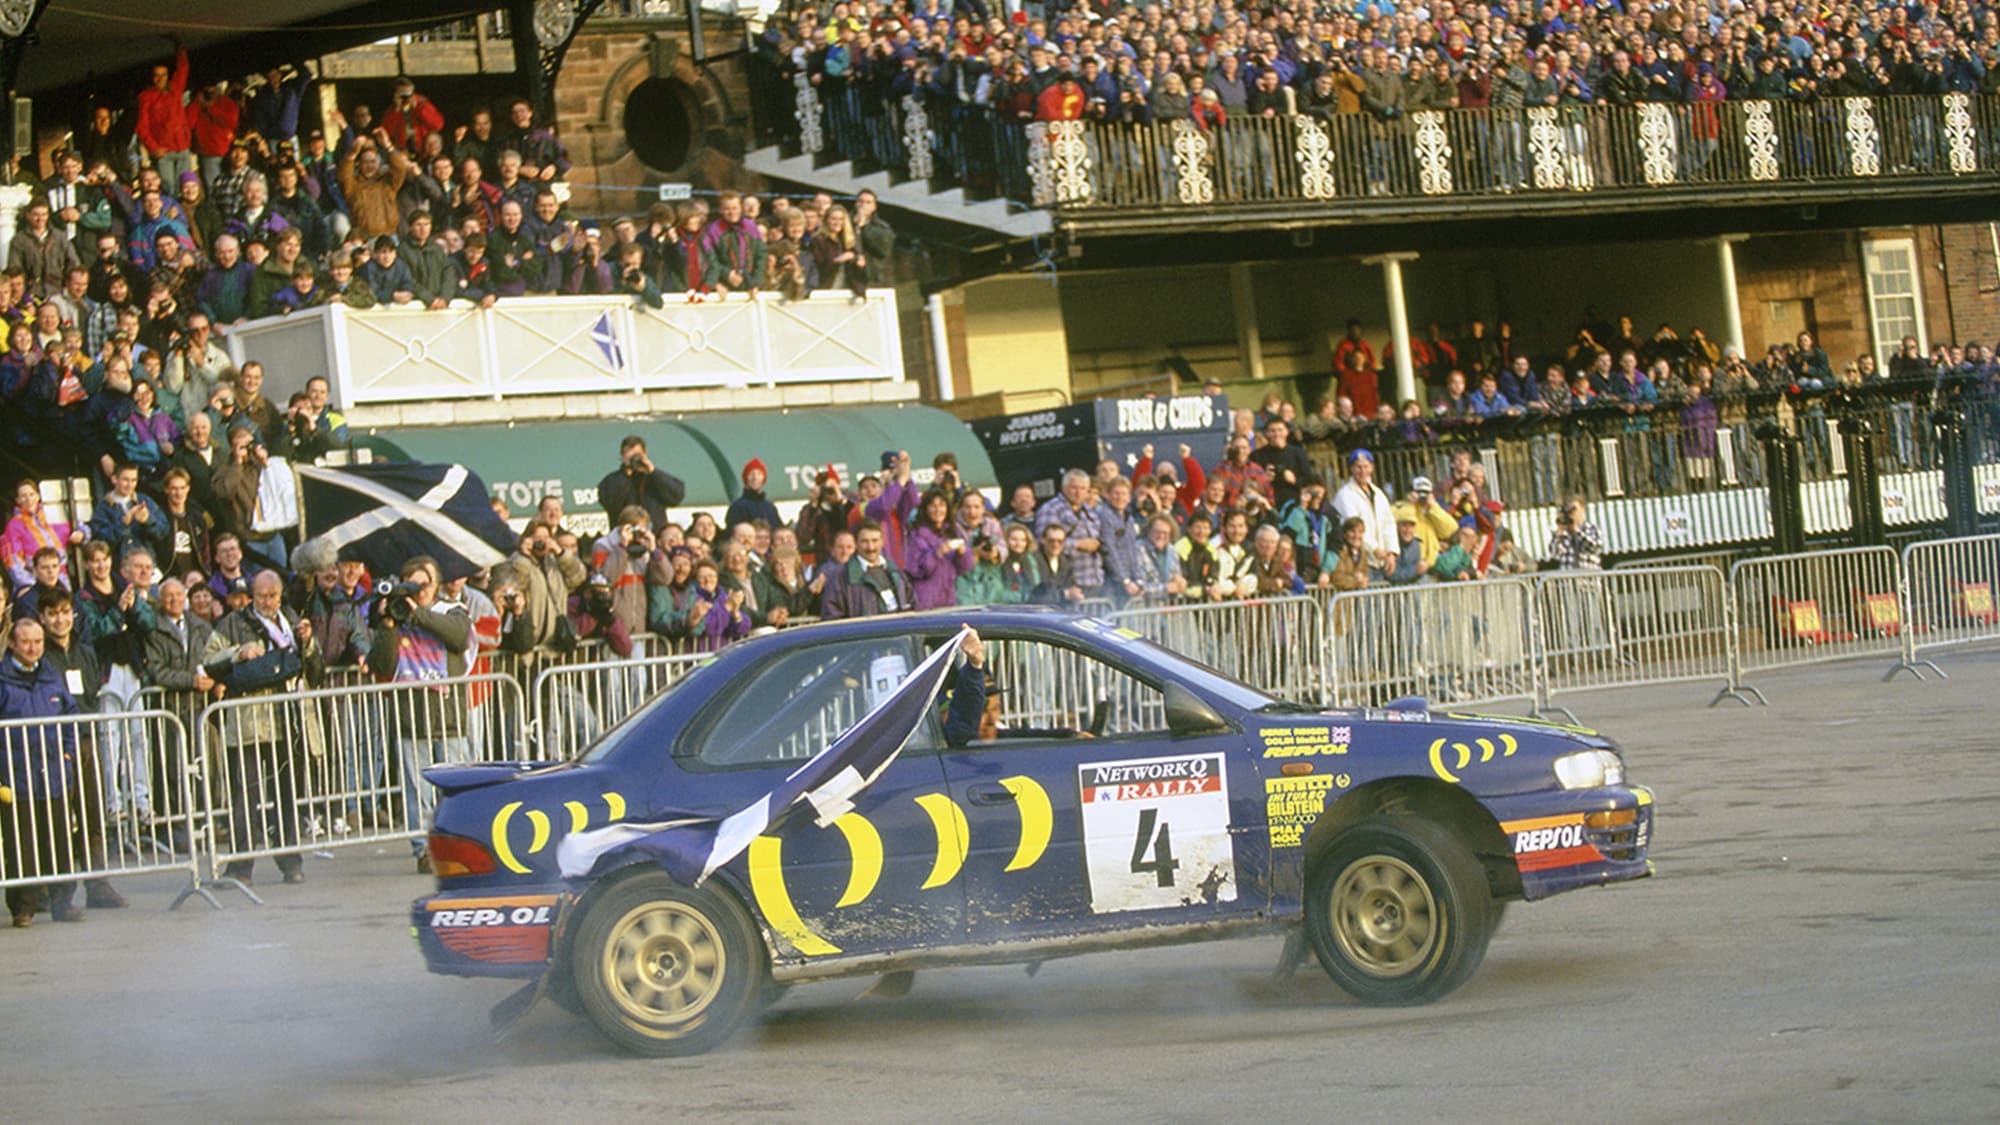 Colin McRae parades in front of the Chester Racecourse crowd after winning the 1995 RAC Rally